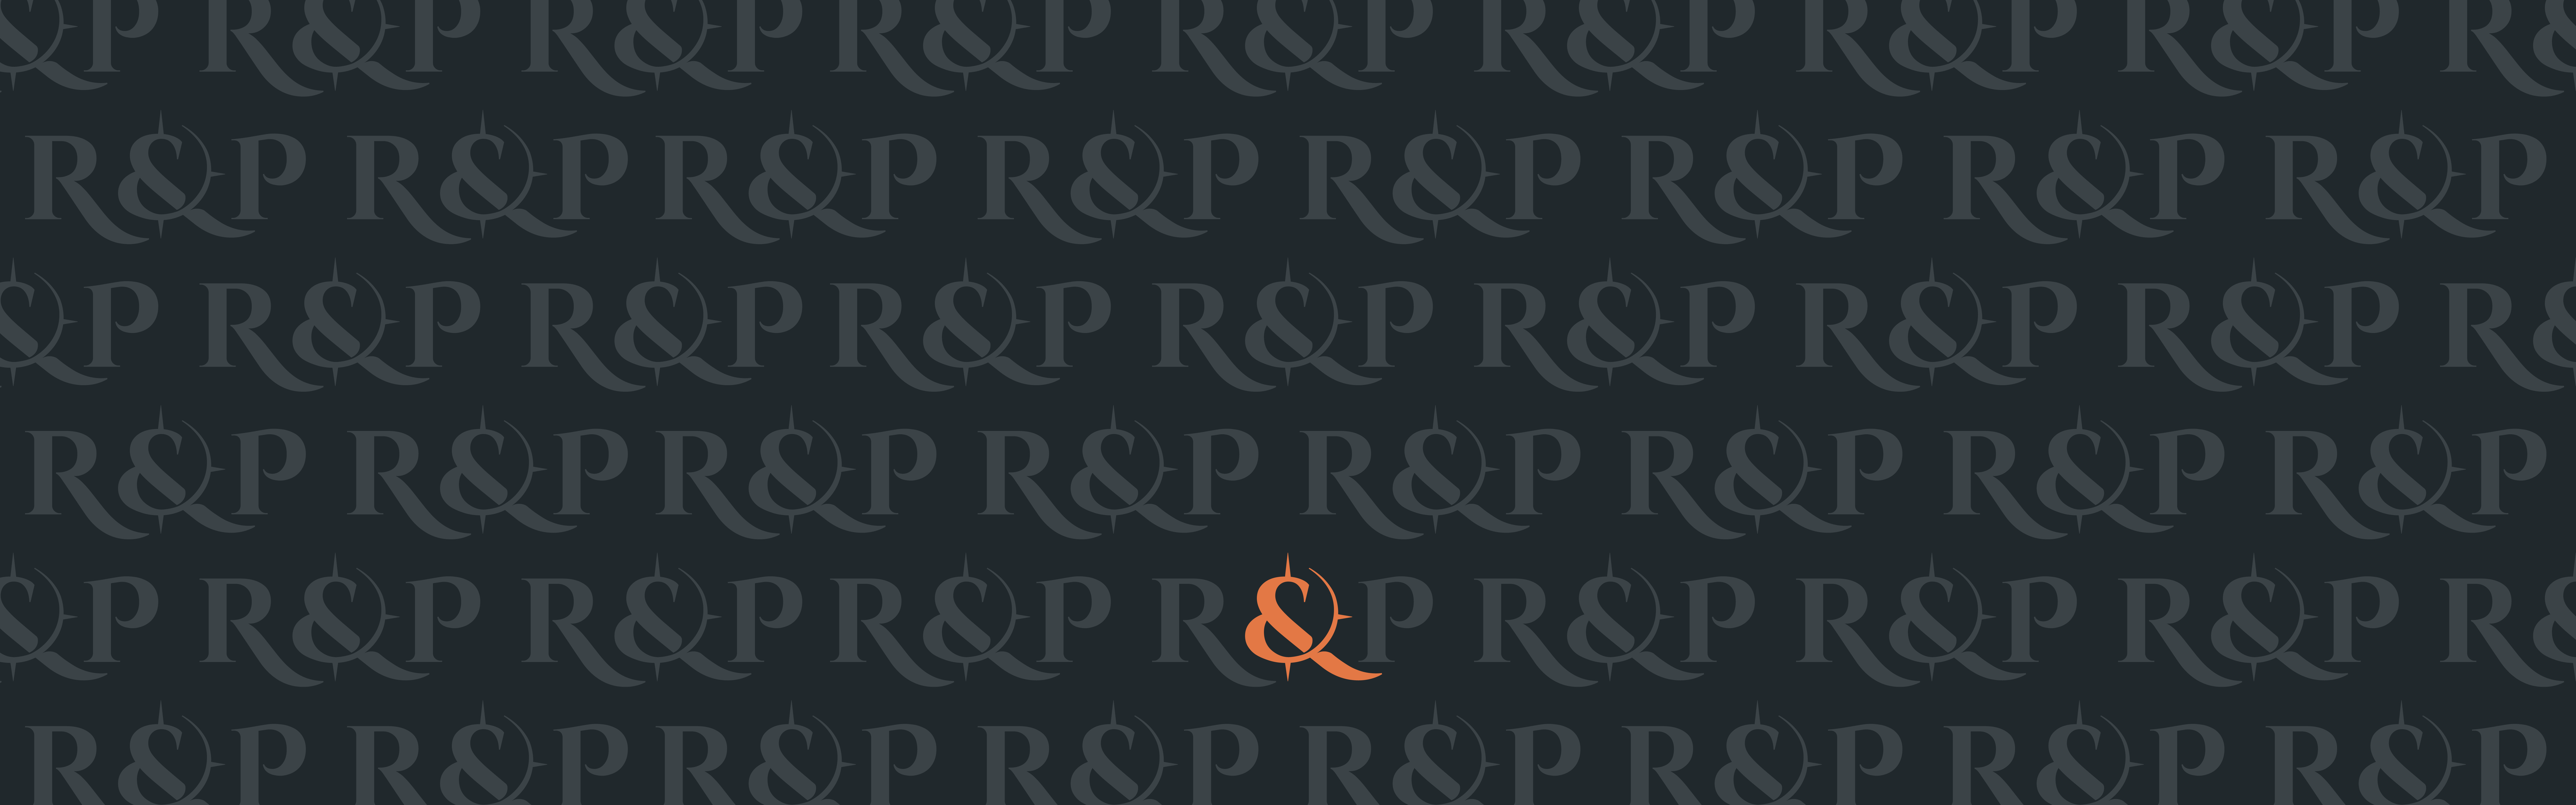 This image features a dark blue background patterned with the repeated names "Runde & Partners" in a lighter blue color forming a grid, with a central orange ampersand symbol ("&") as